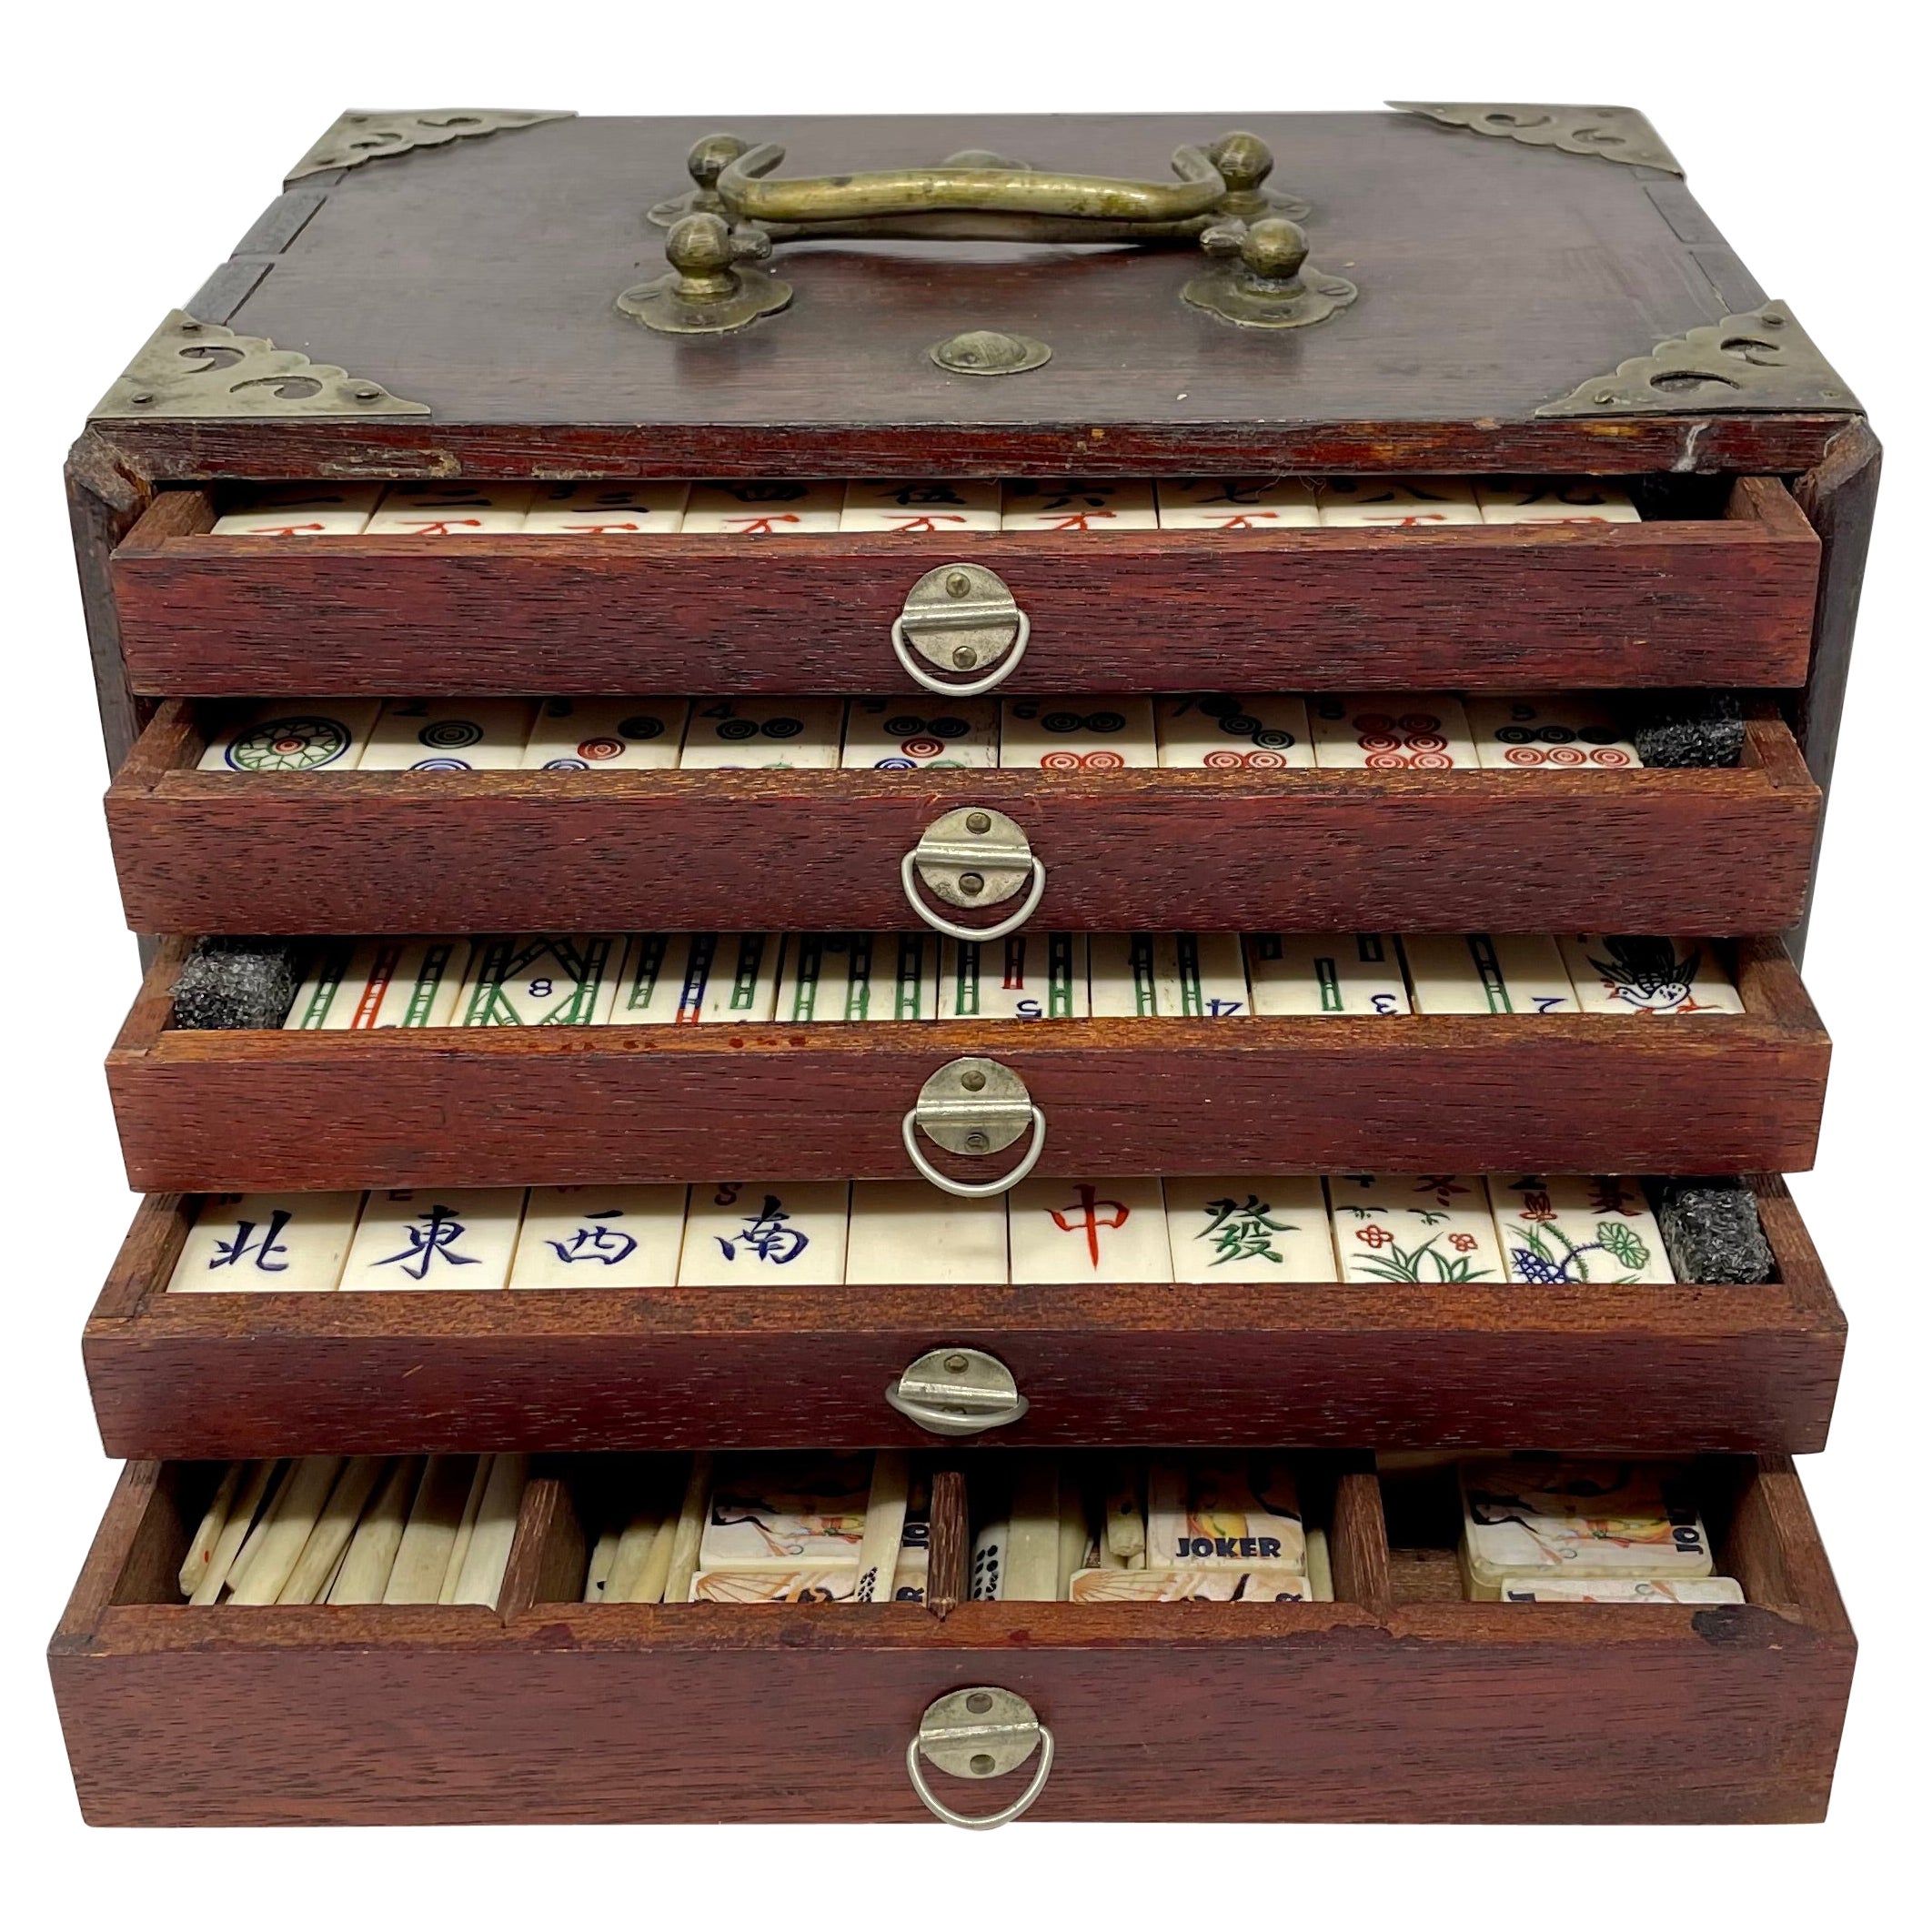 Antique Chinese Mahjong Games Box Set with Complete Interior, Circa 1900-1910.